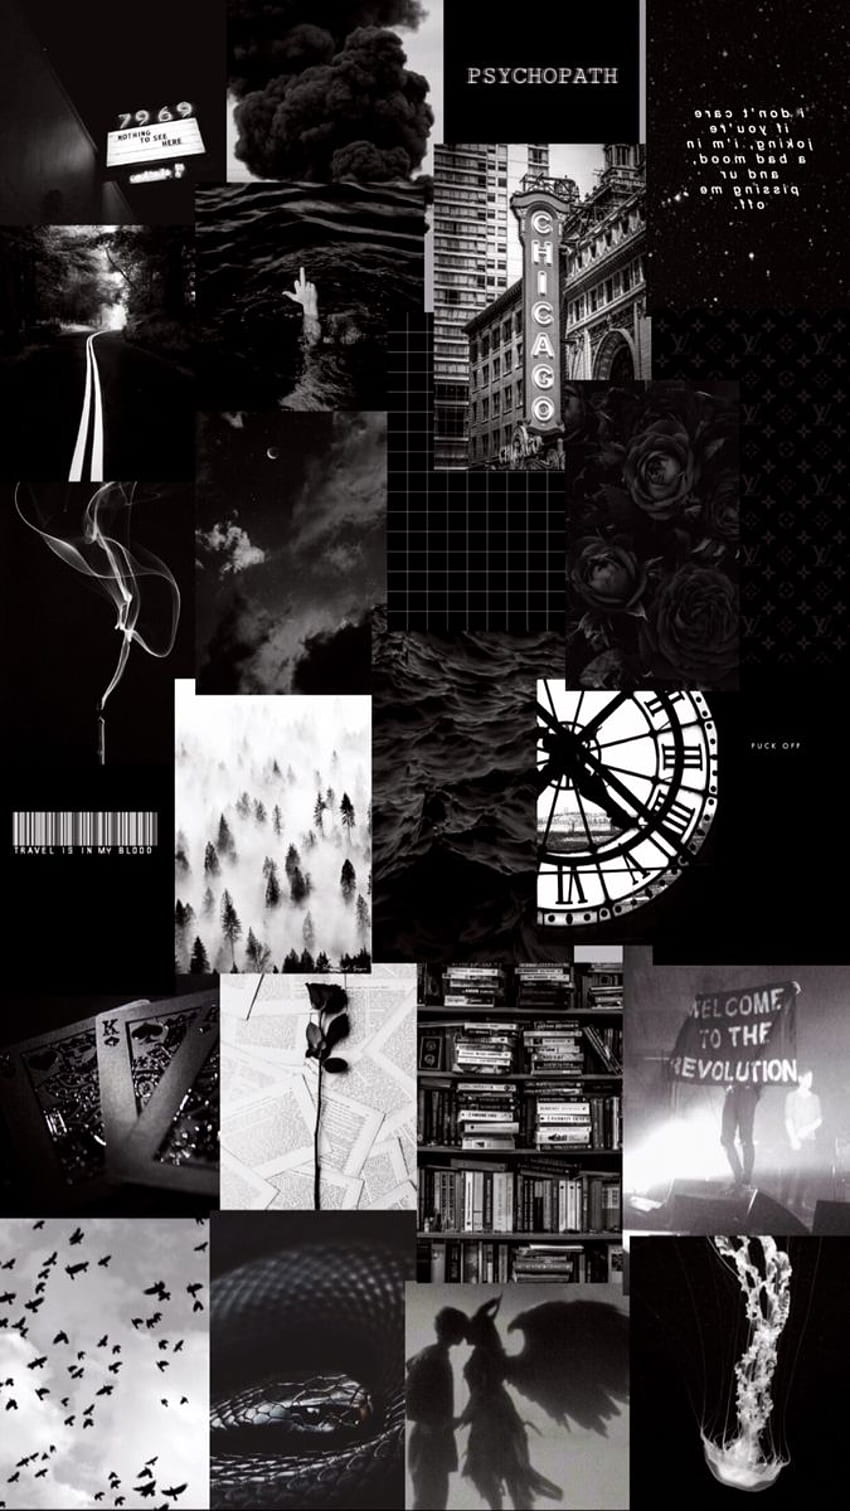 A collage of black and white images - Black